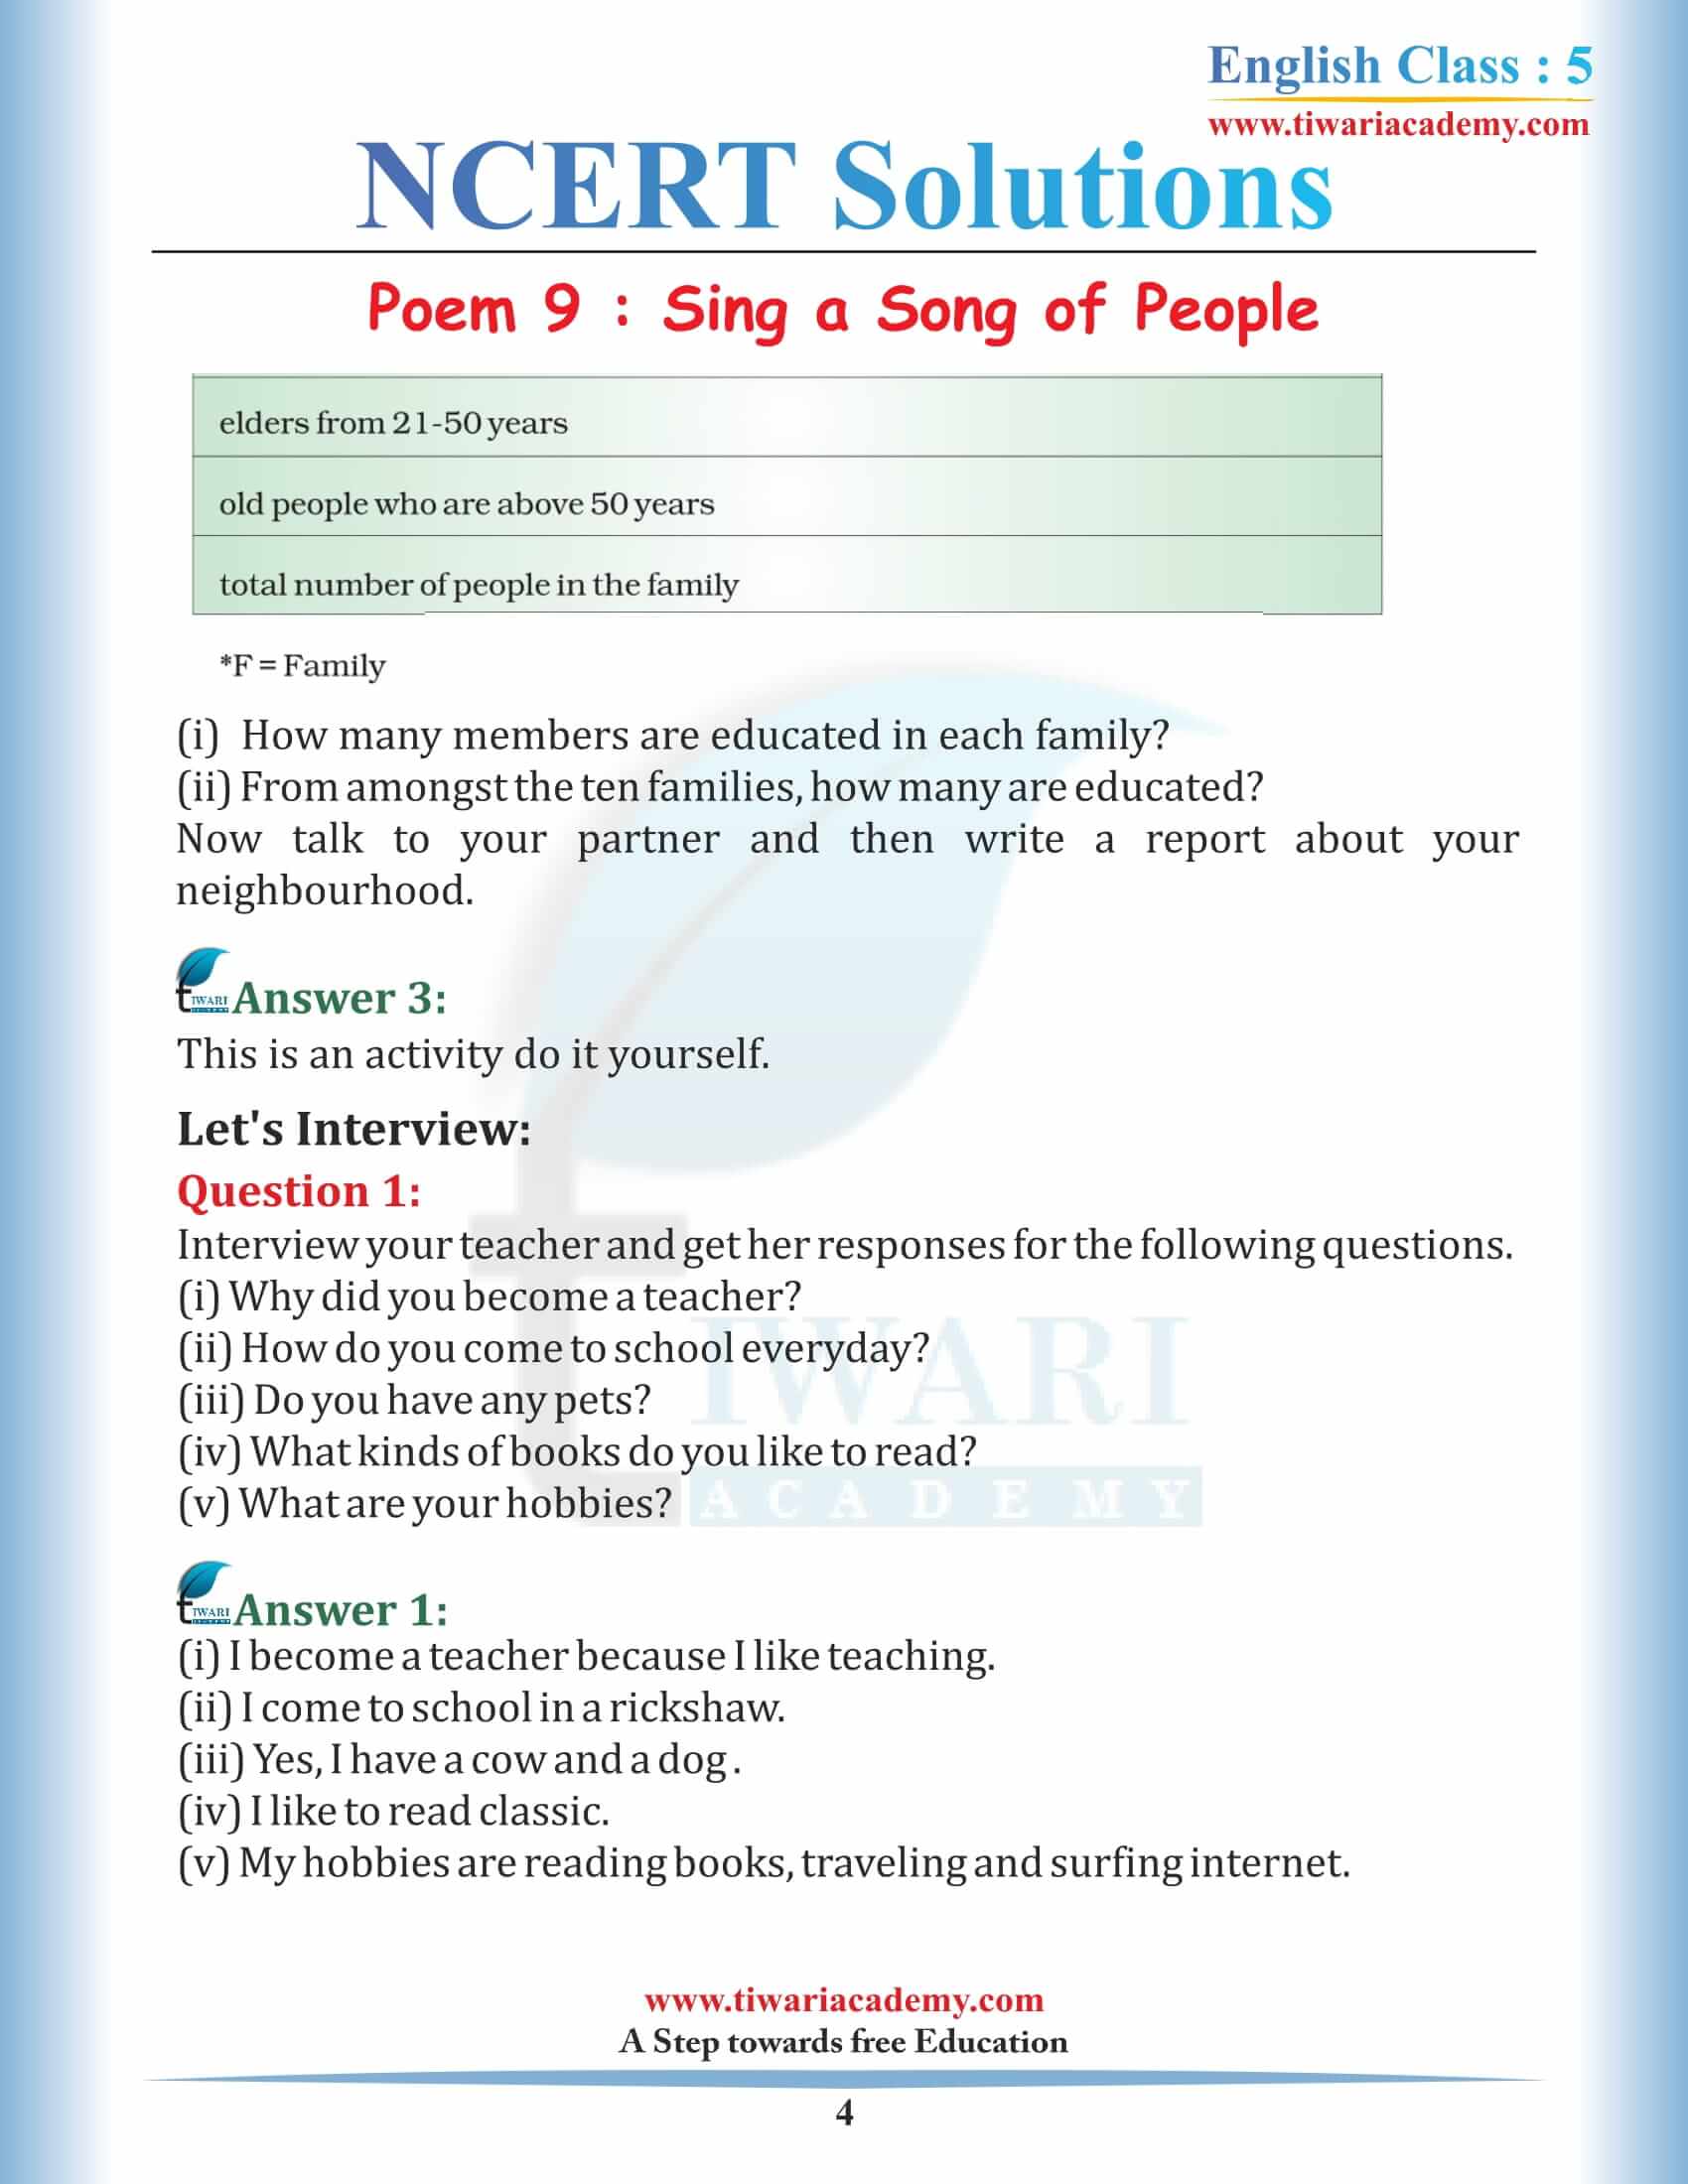 NCERT Solutions for Class 5 English Chapter 9 Sing a Song of People free download